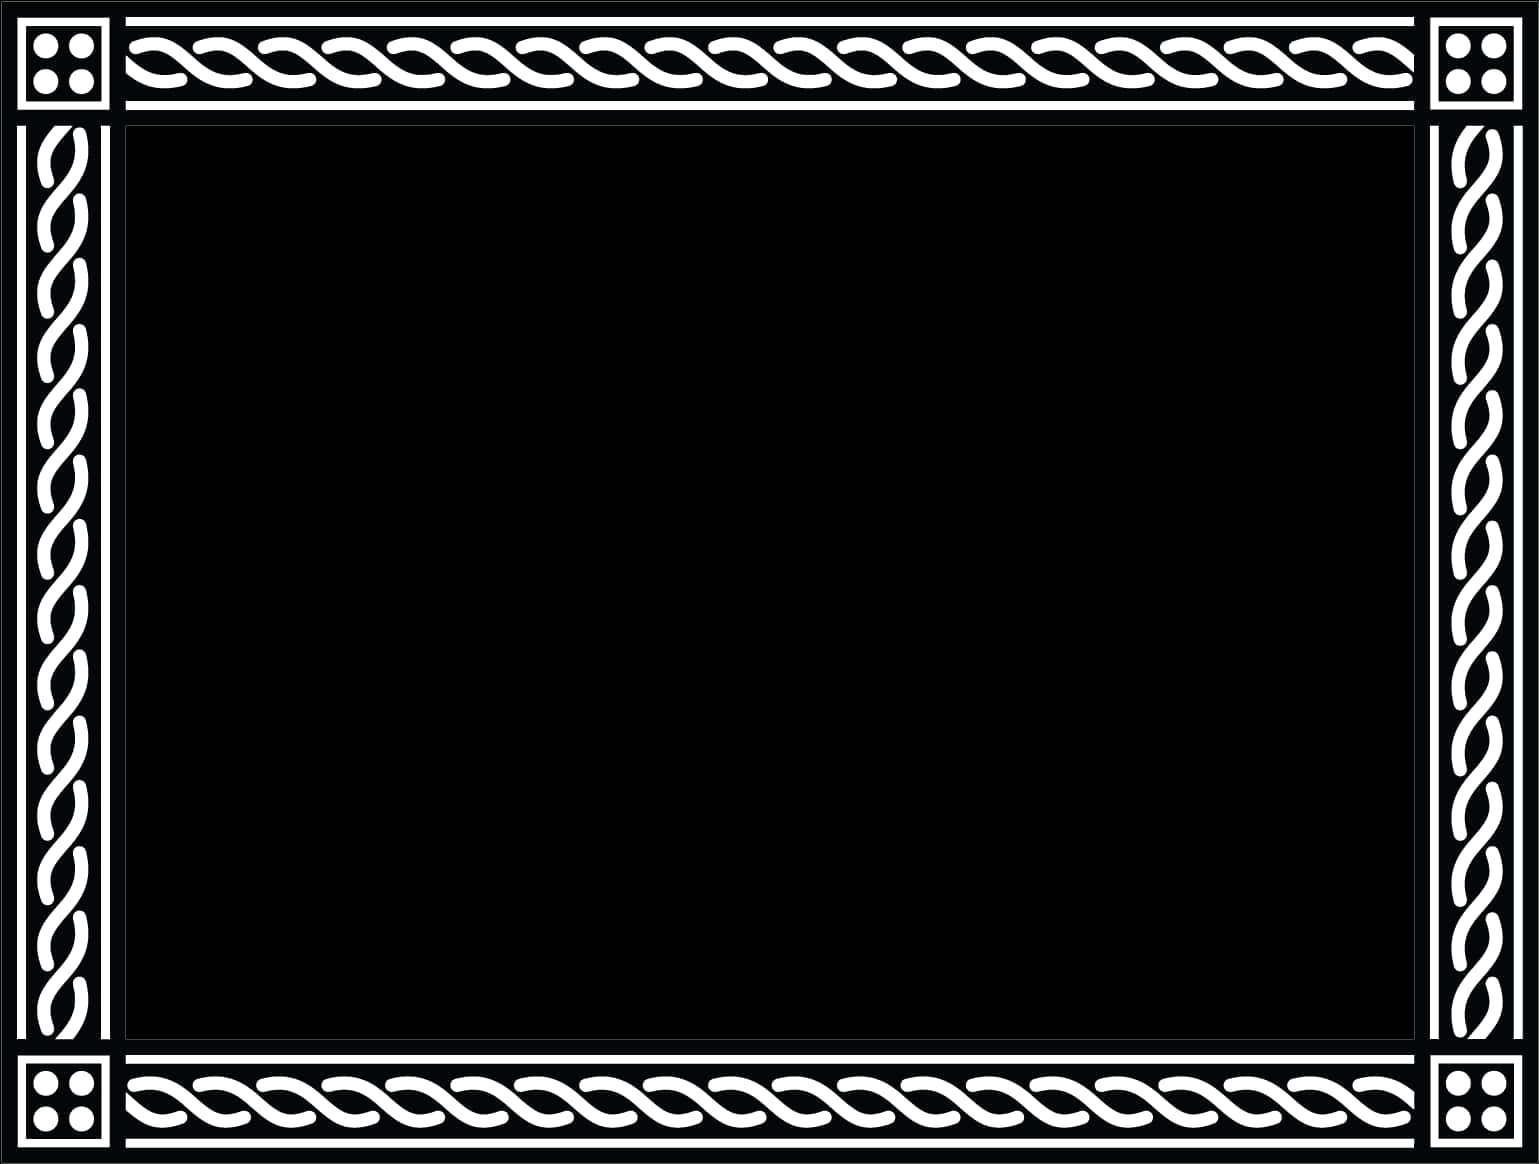 A Black And White Border